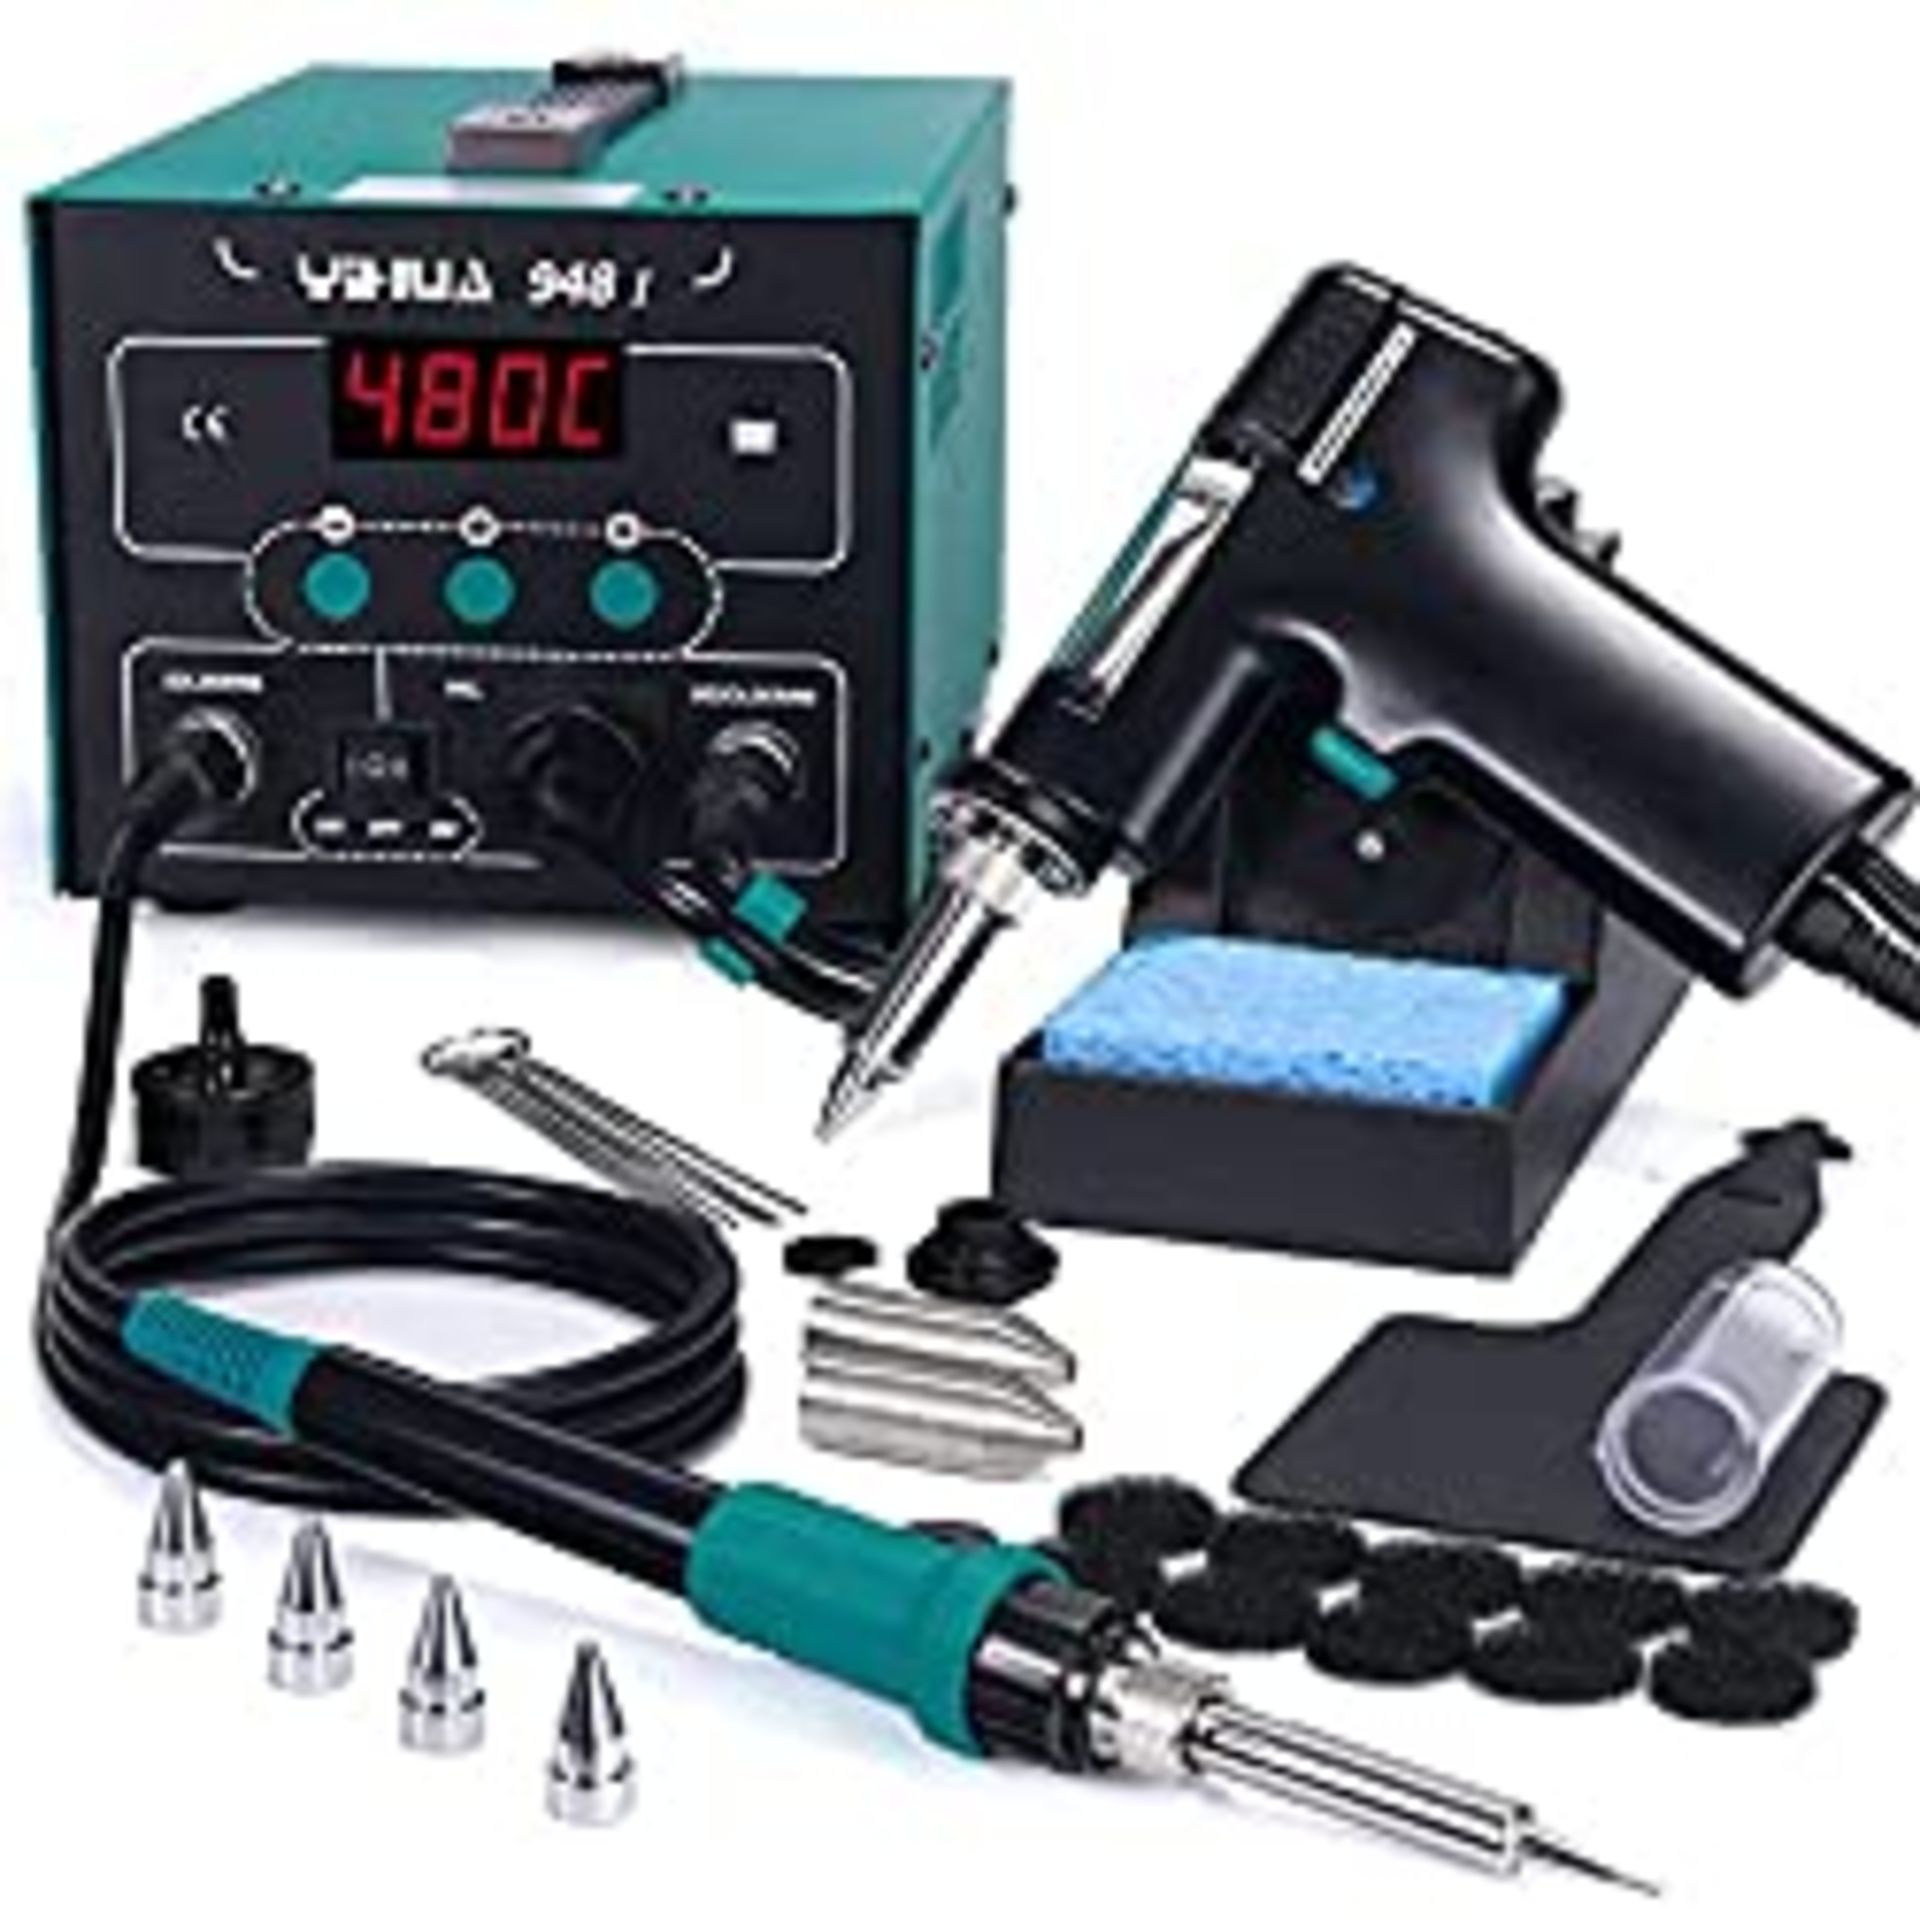 RRP £139.99 YIHUA 948-I Soldering Desoldering Station 2-in-1 with